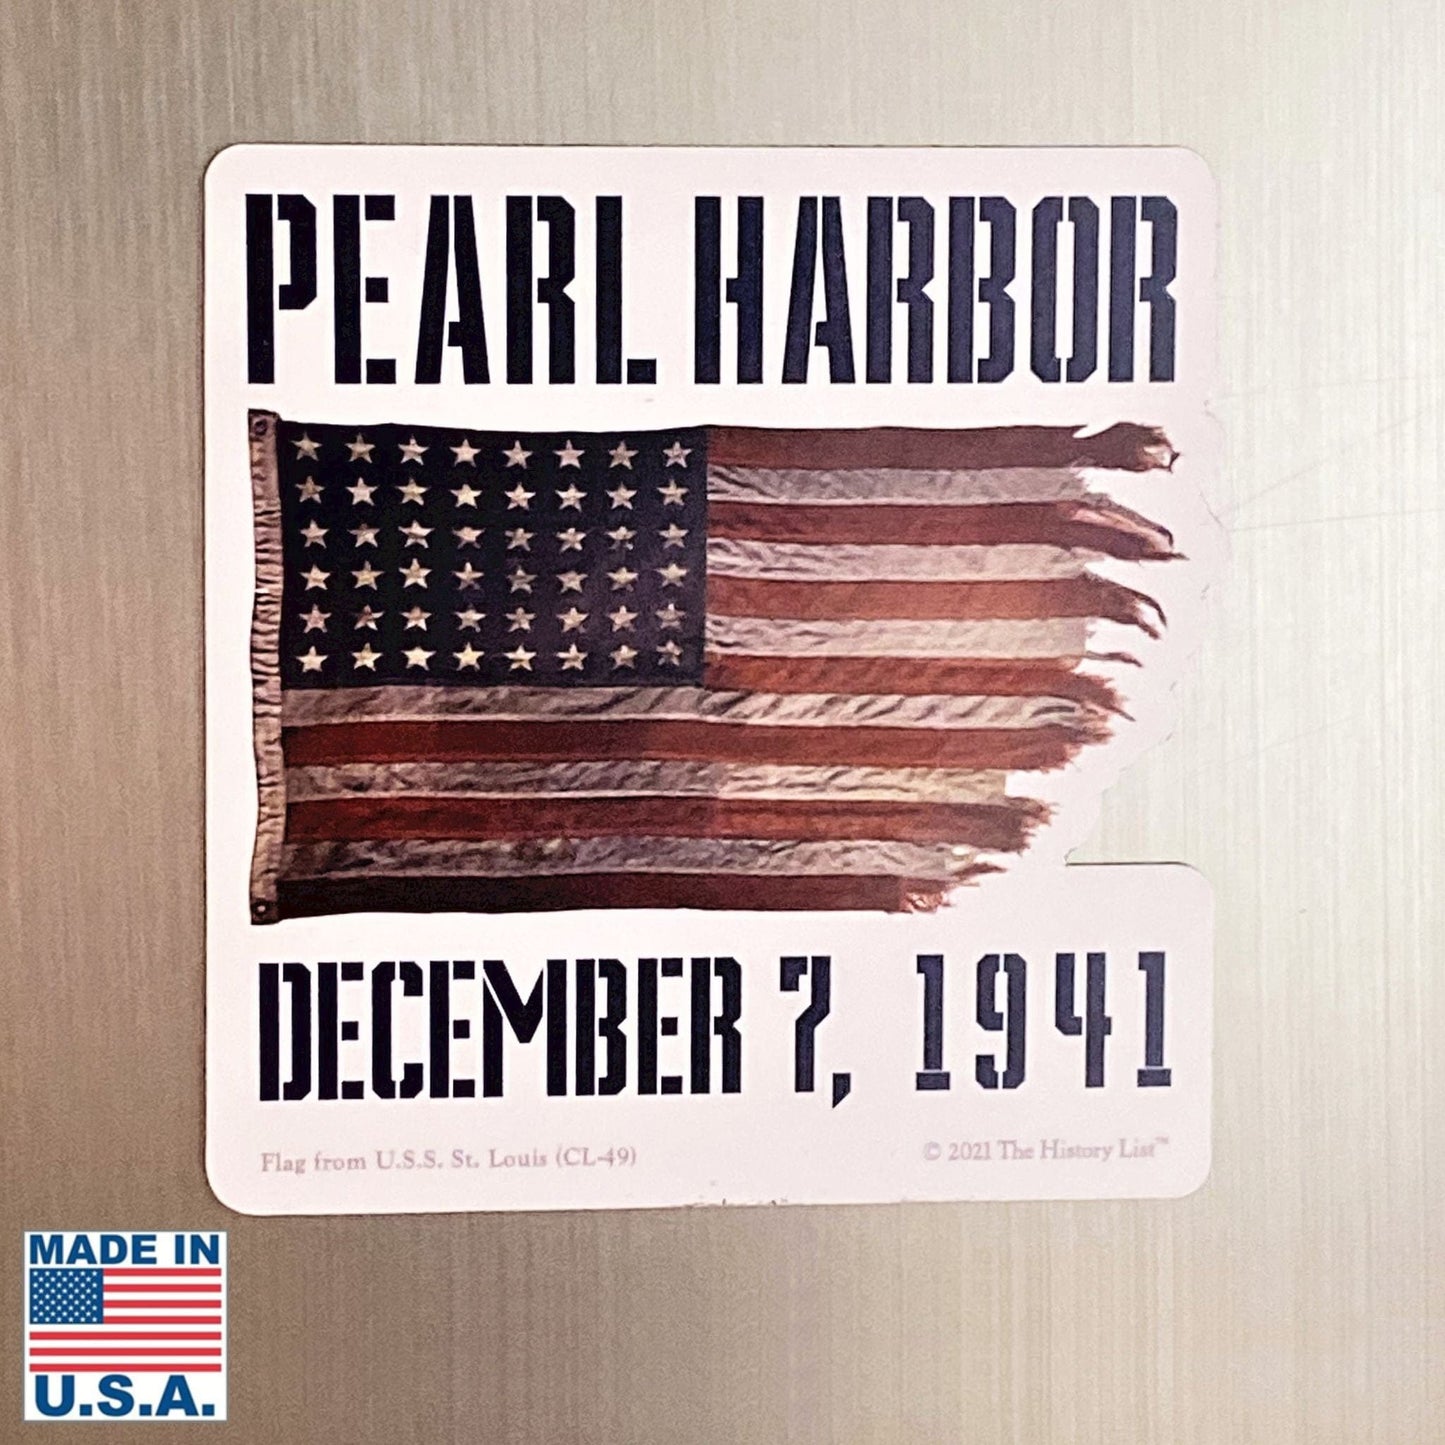 Pearl Harbor “Battleship Row” Magnet from the History List Store